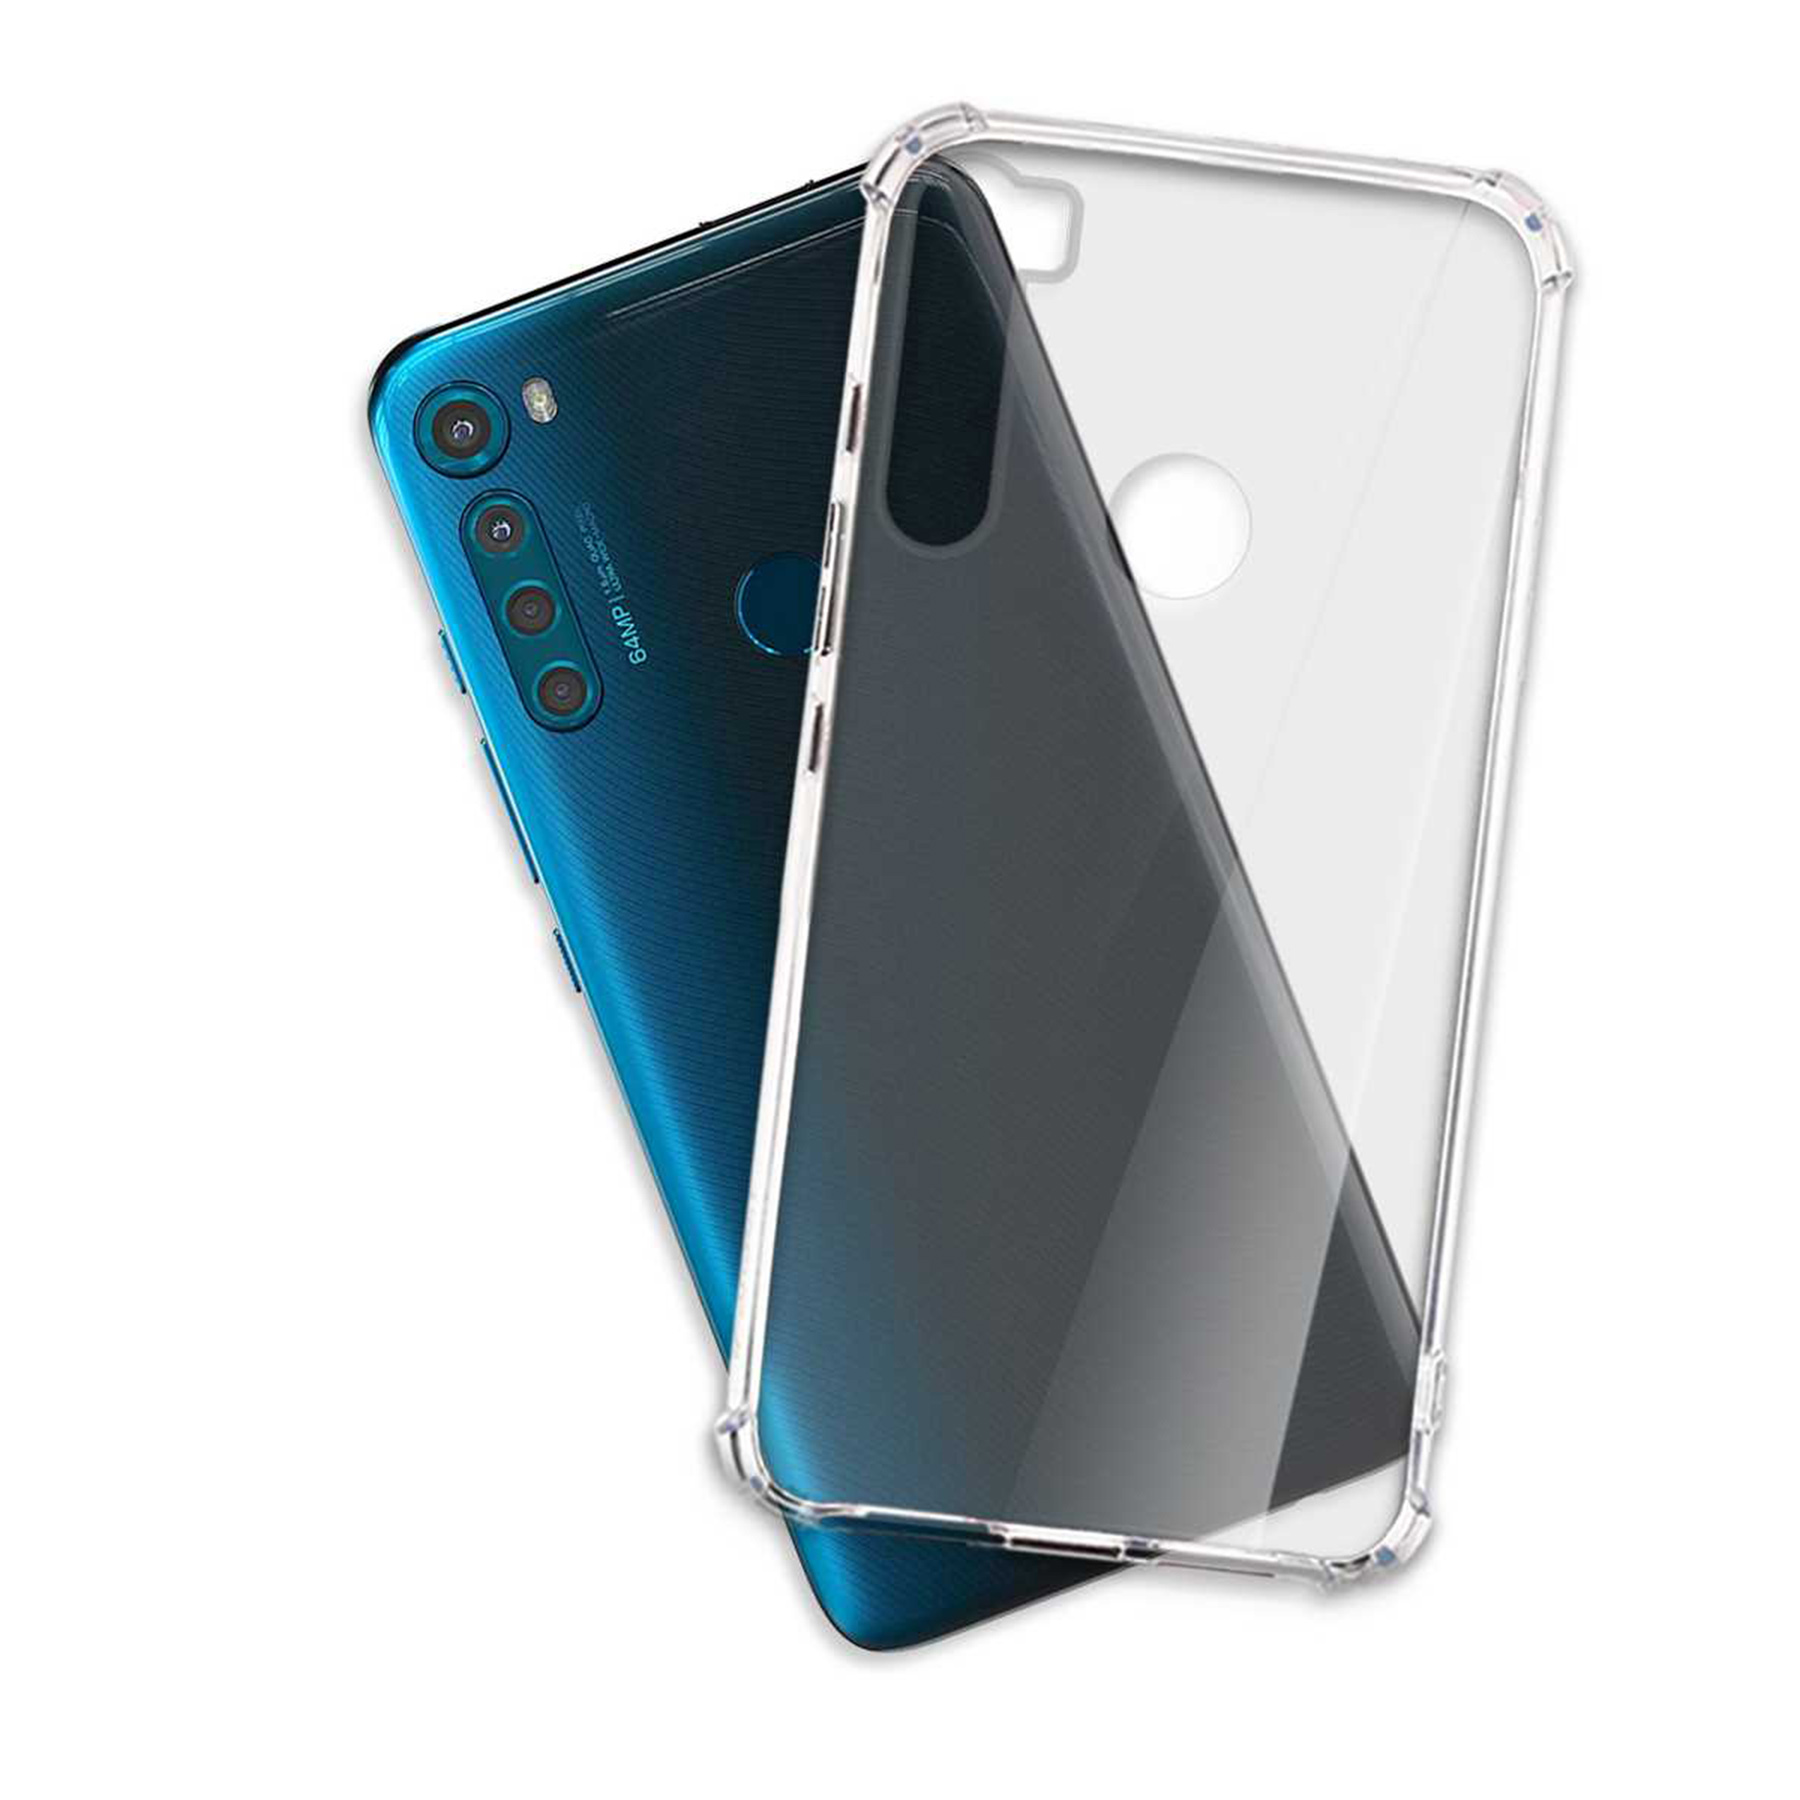 MTB MORE ENERGY Clear Backcover, Motorola, One Transparent Plus, Fusion Case, Armor